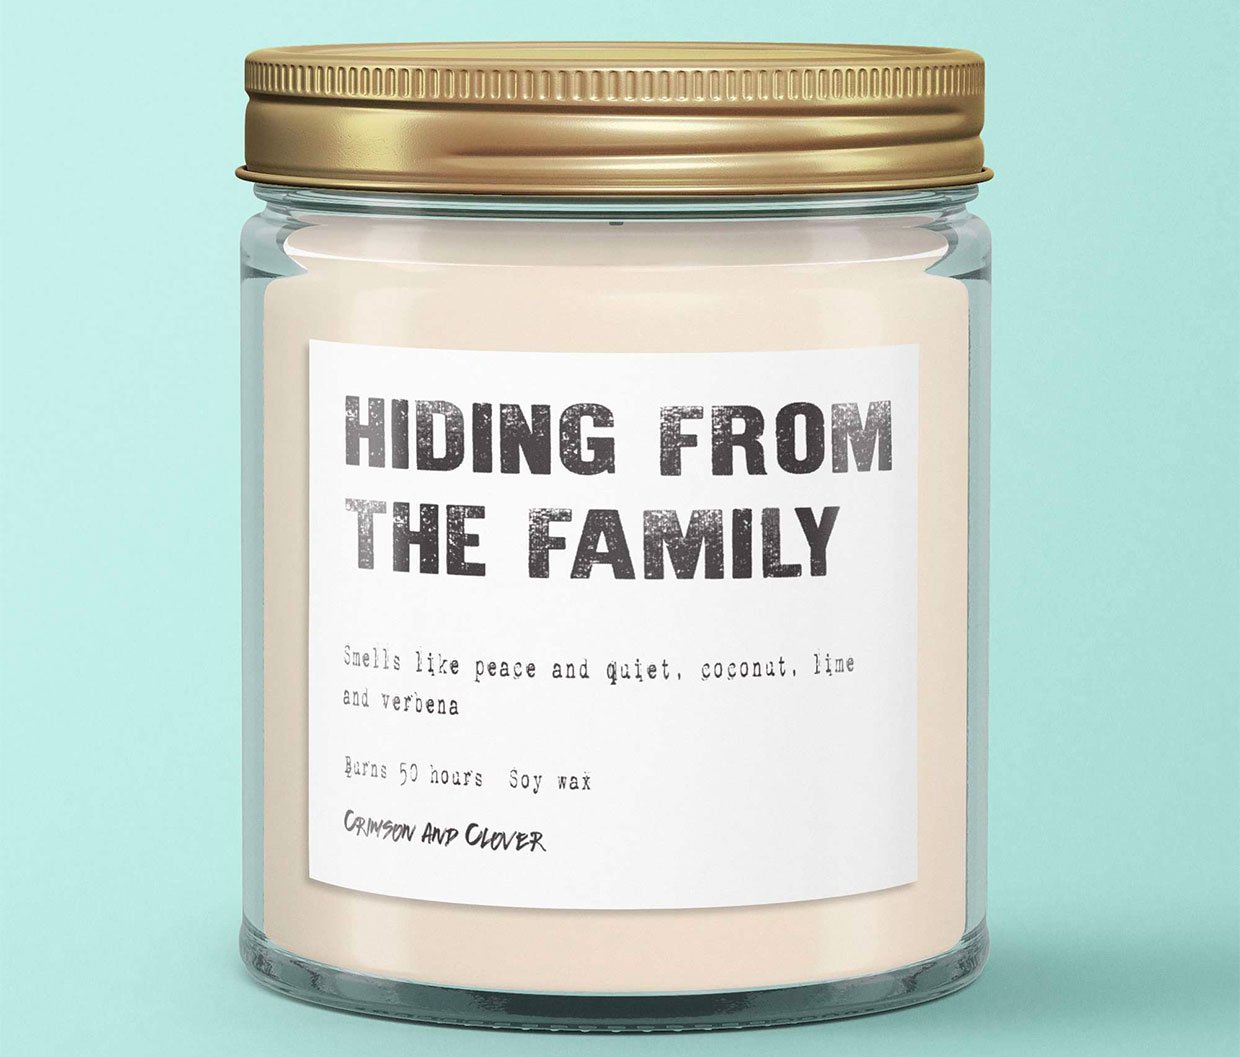 Hiding From the Family Candle